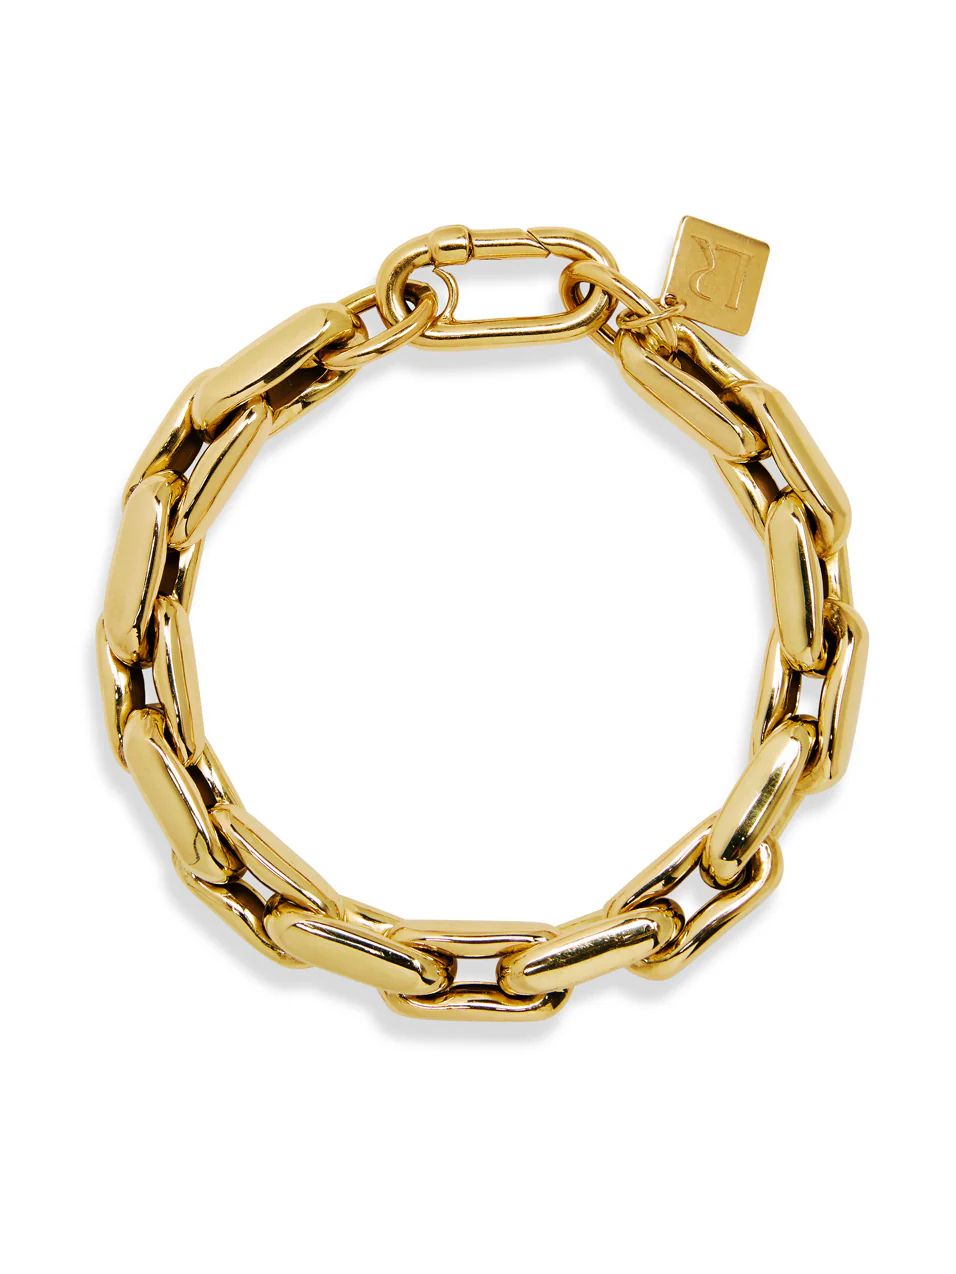 LR3 Small Link Yellow Gold Bracelet | YLANG 23